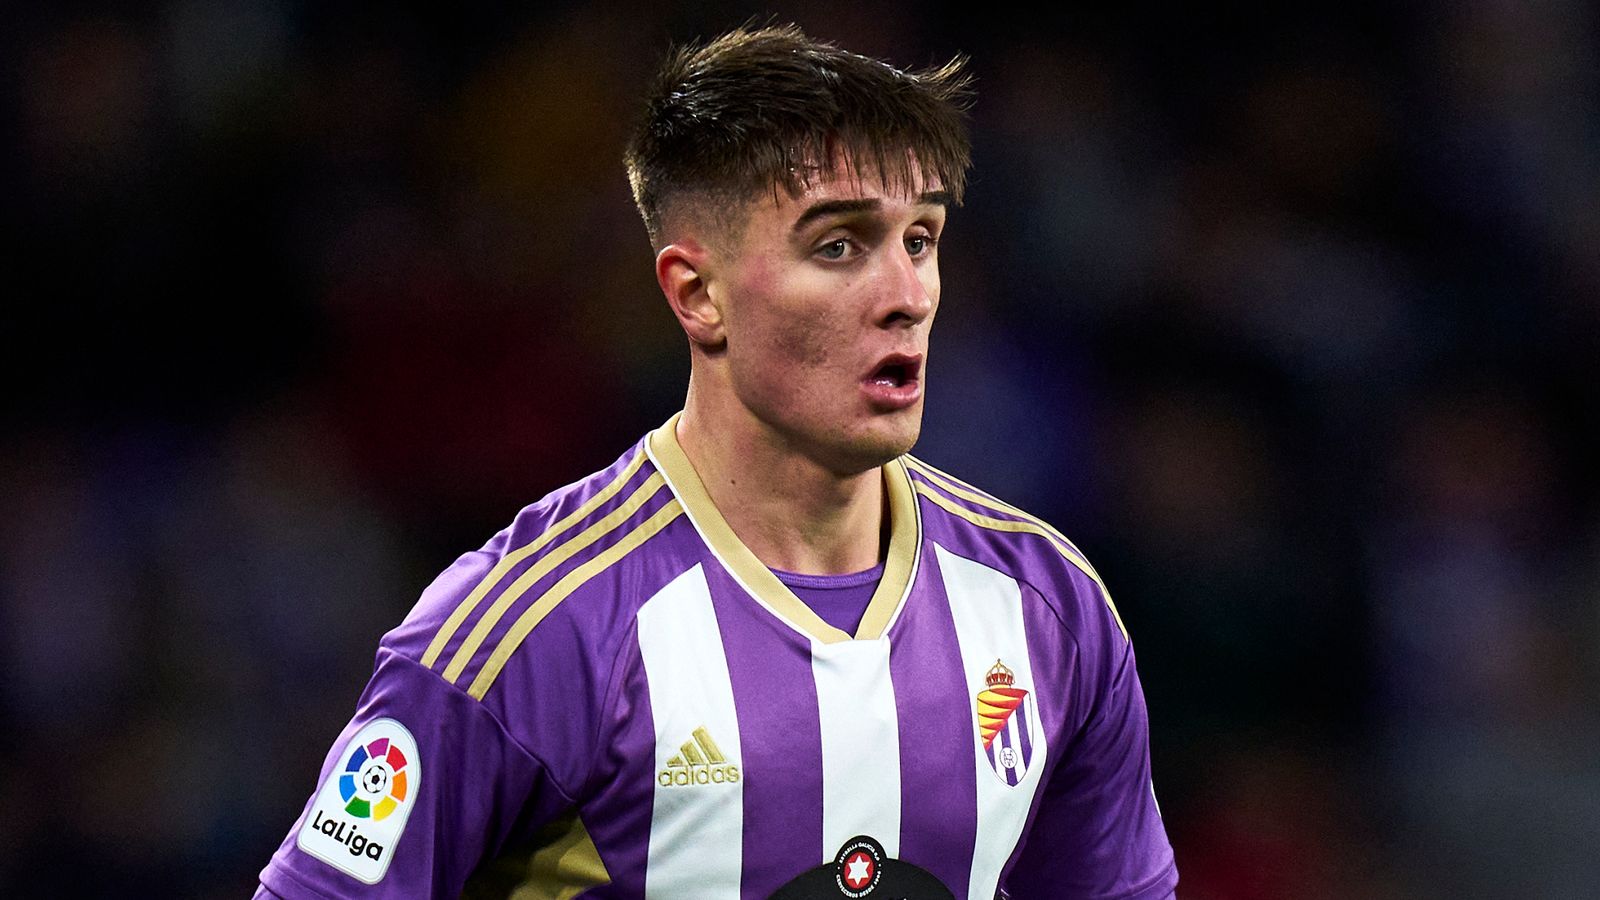 "He Is Arsenal's First Priority" - Arsenal Set To Sign The €15M Spanish Right-Back In 2023